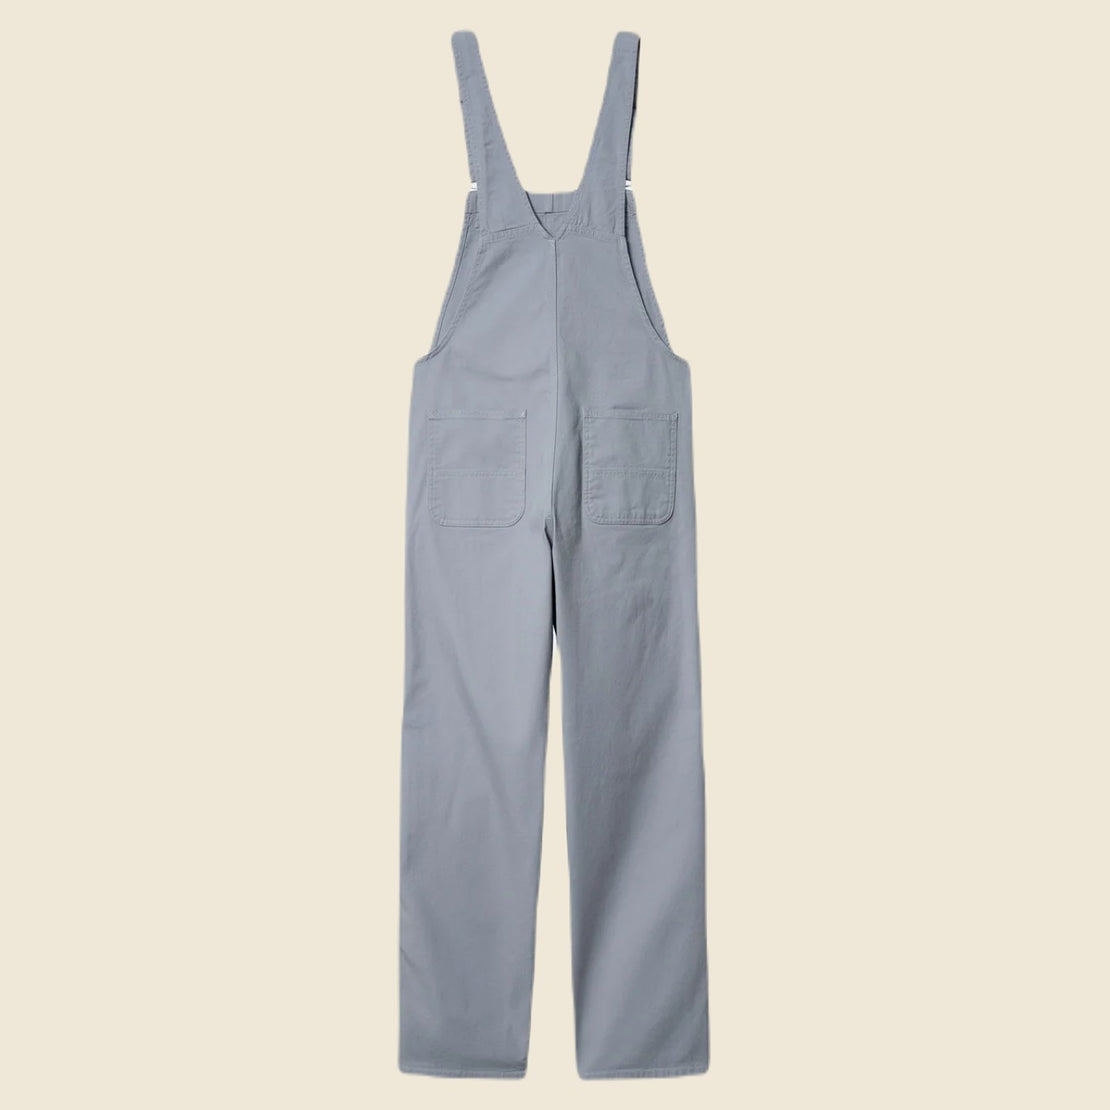 Bib Overall Straight - Mirror - Carhartt WIP - STAG Provisions - W - Onepiece - Overalls